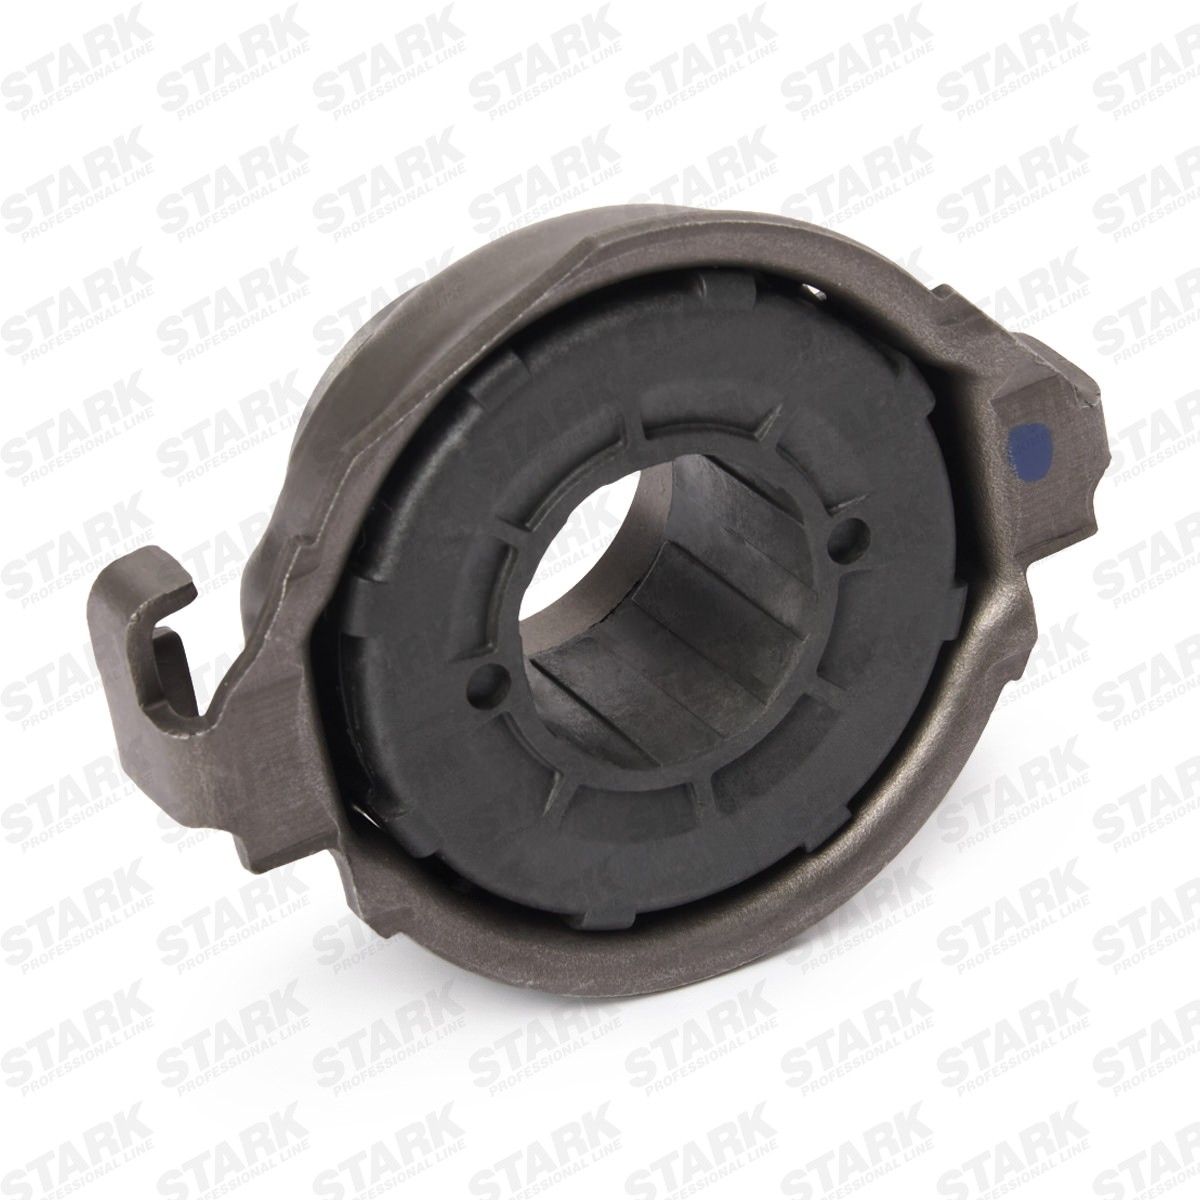 OEM-quality STARK SKCK-0100188 Clutch replacement kit